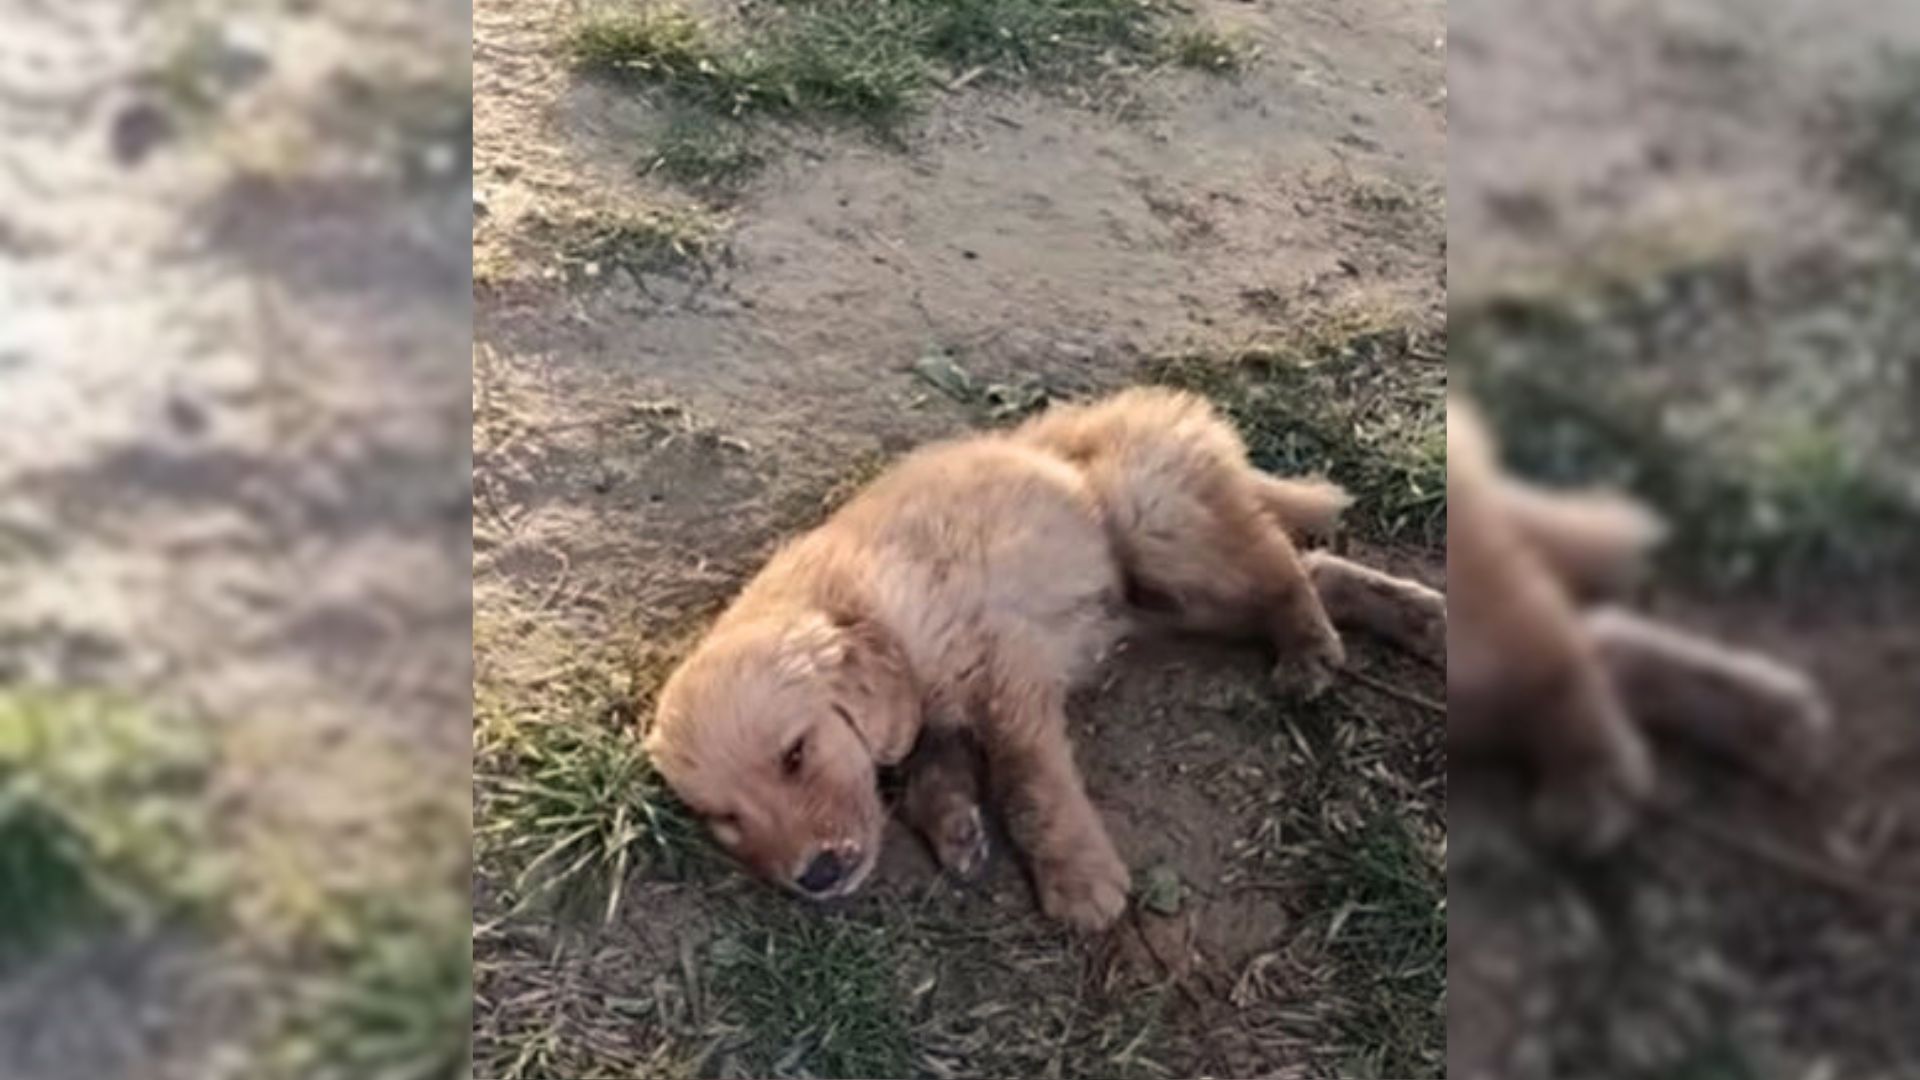 Rescuers Found A Motionless Puppy On The Ground And Immediately Rushed Him To A Clinic